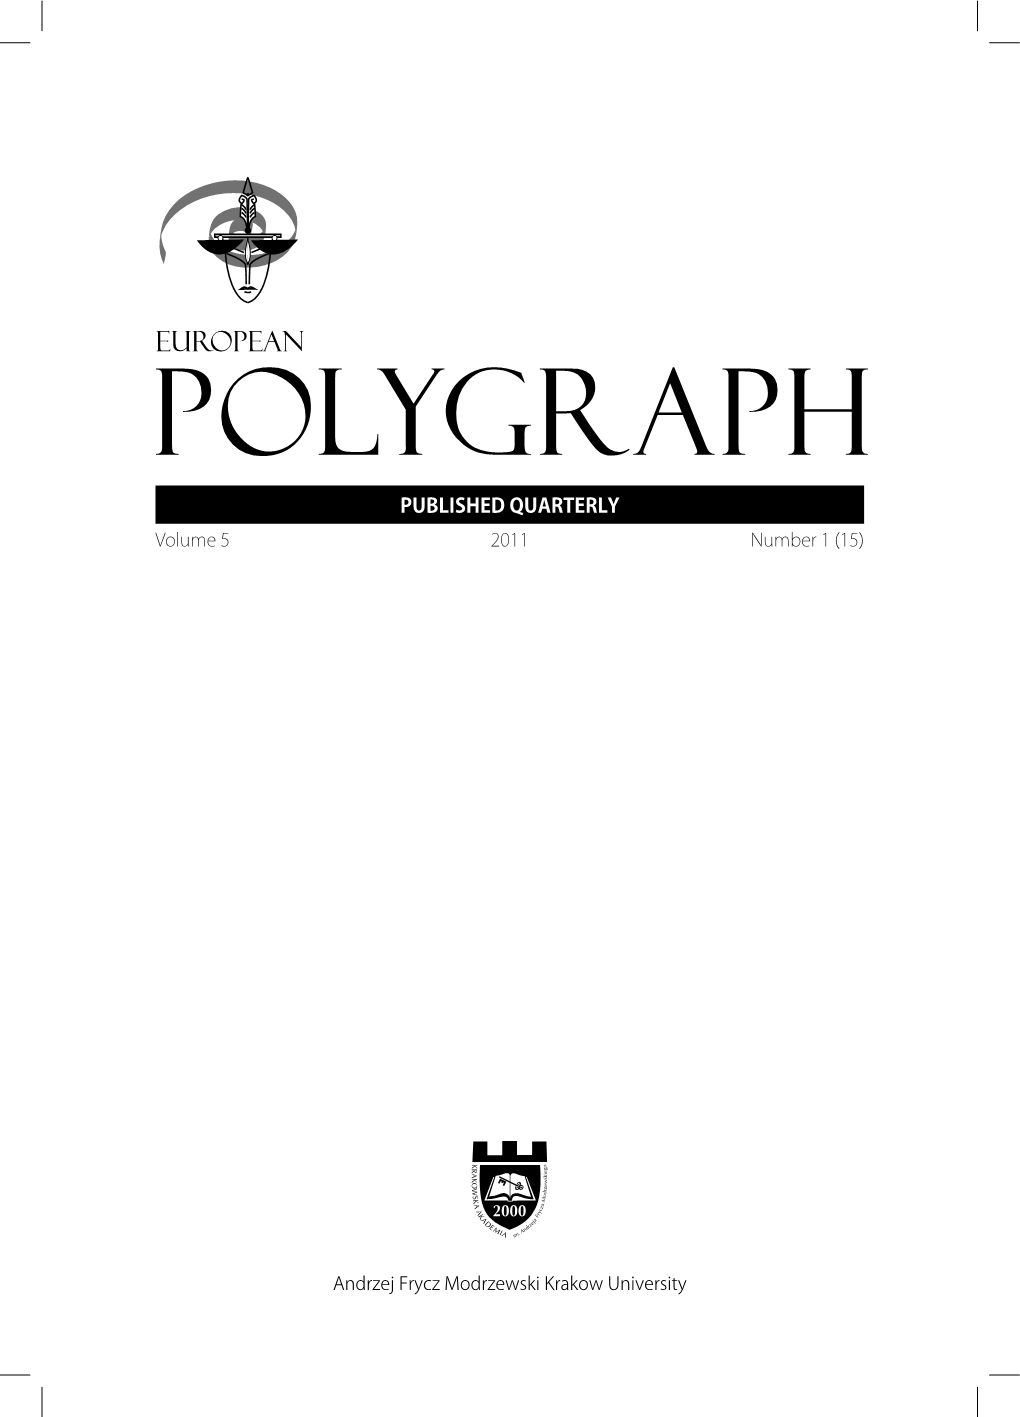 Logical Identity of Conclusions from Polygraph Testing Performed in Control Questions Test (CQT) and Guilty Knowledge Test (GKT) Techniques